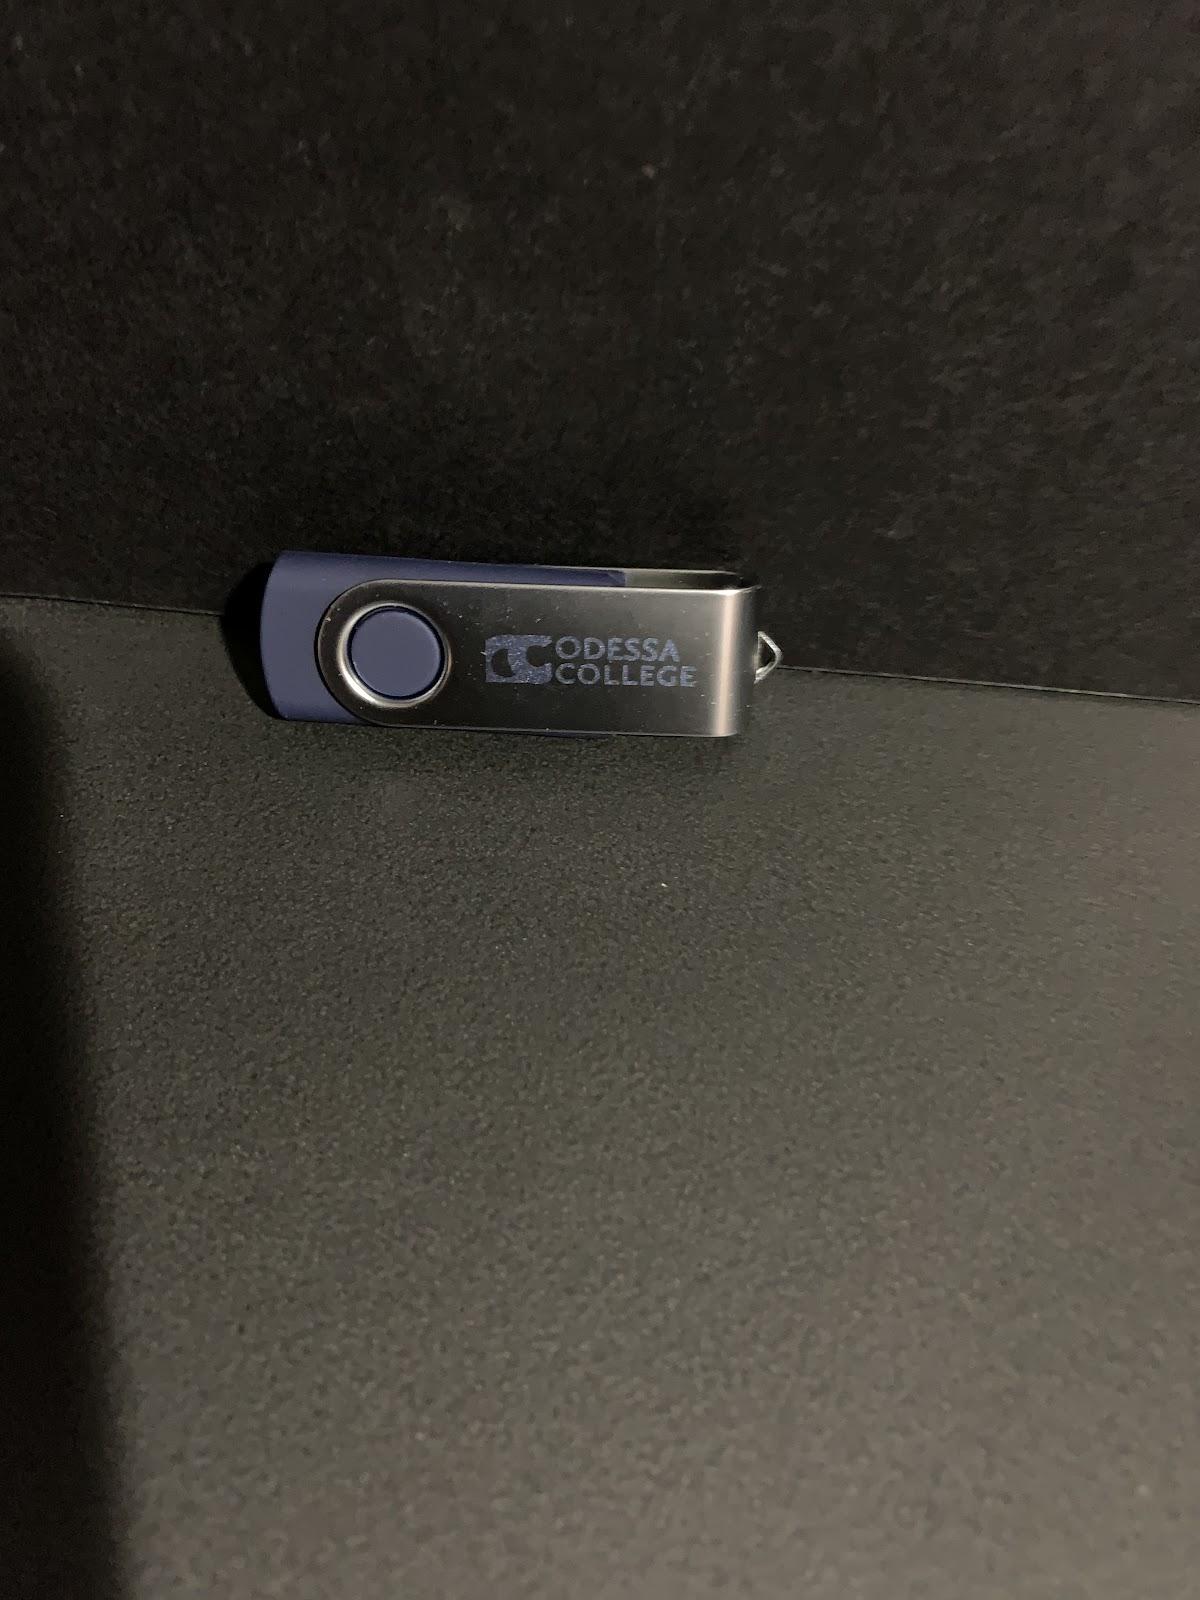 Odessa College 4GB Flash Drives (CLEARANCE SALE)